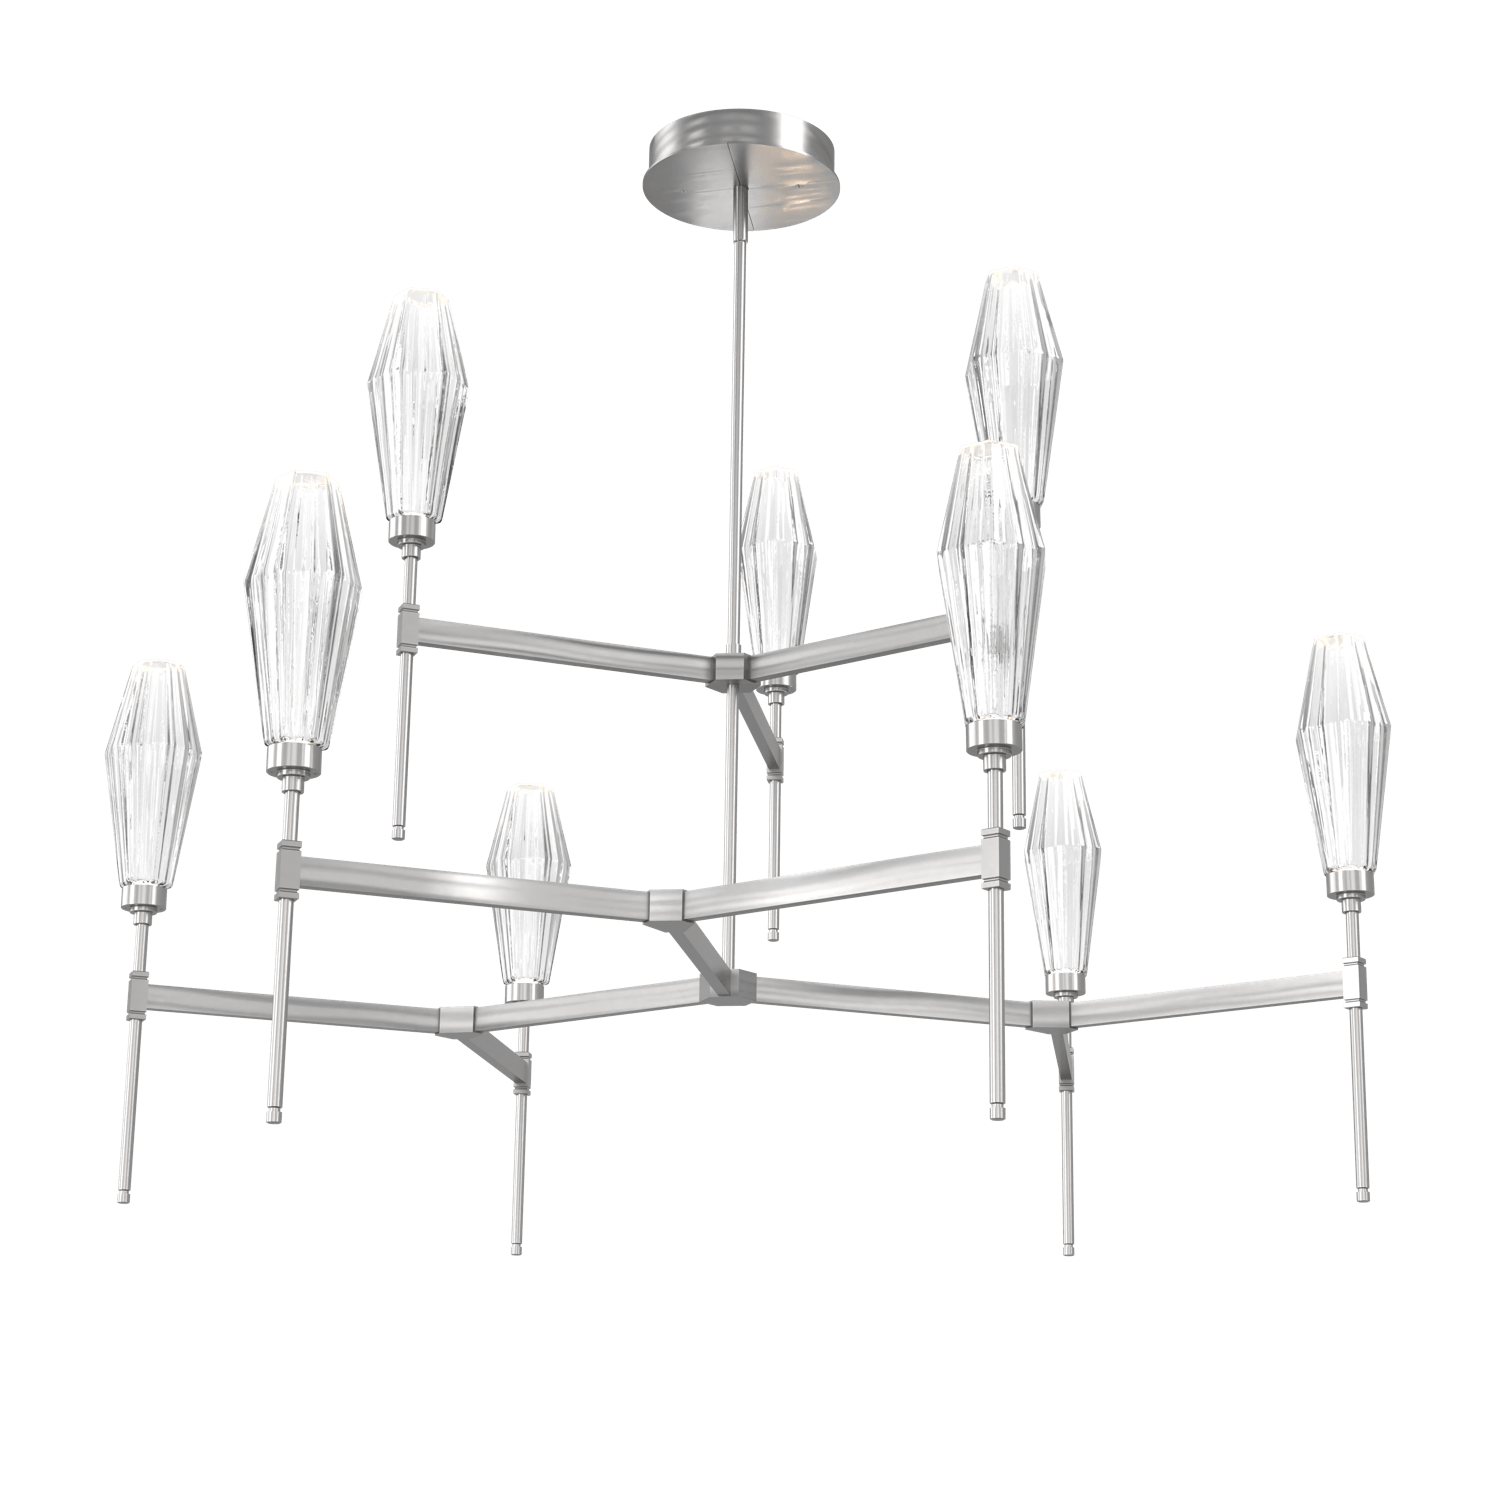 CHB0049-54-SN-RC-Hammerton-Studio-Aalto-54-inch-round-two-tier-belvedere-chandelier-with-satin-nickel-finish-and-optic-ribbed-clear-glass-shades-and-LED-lamping